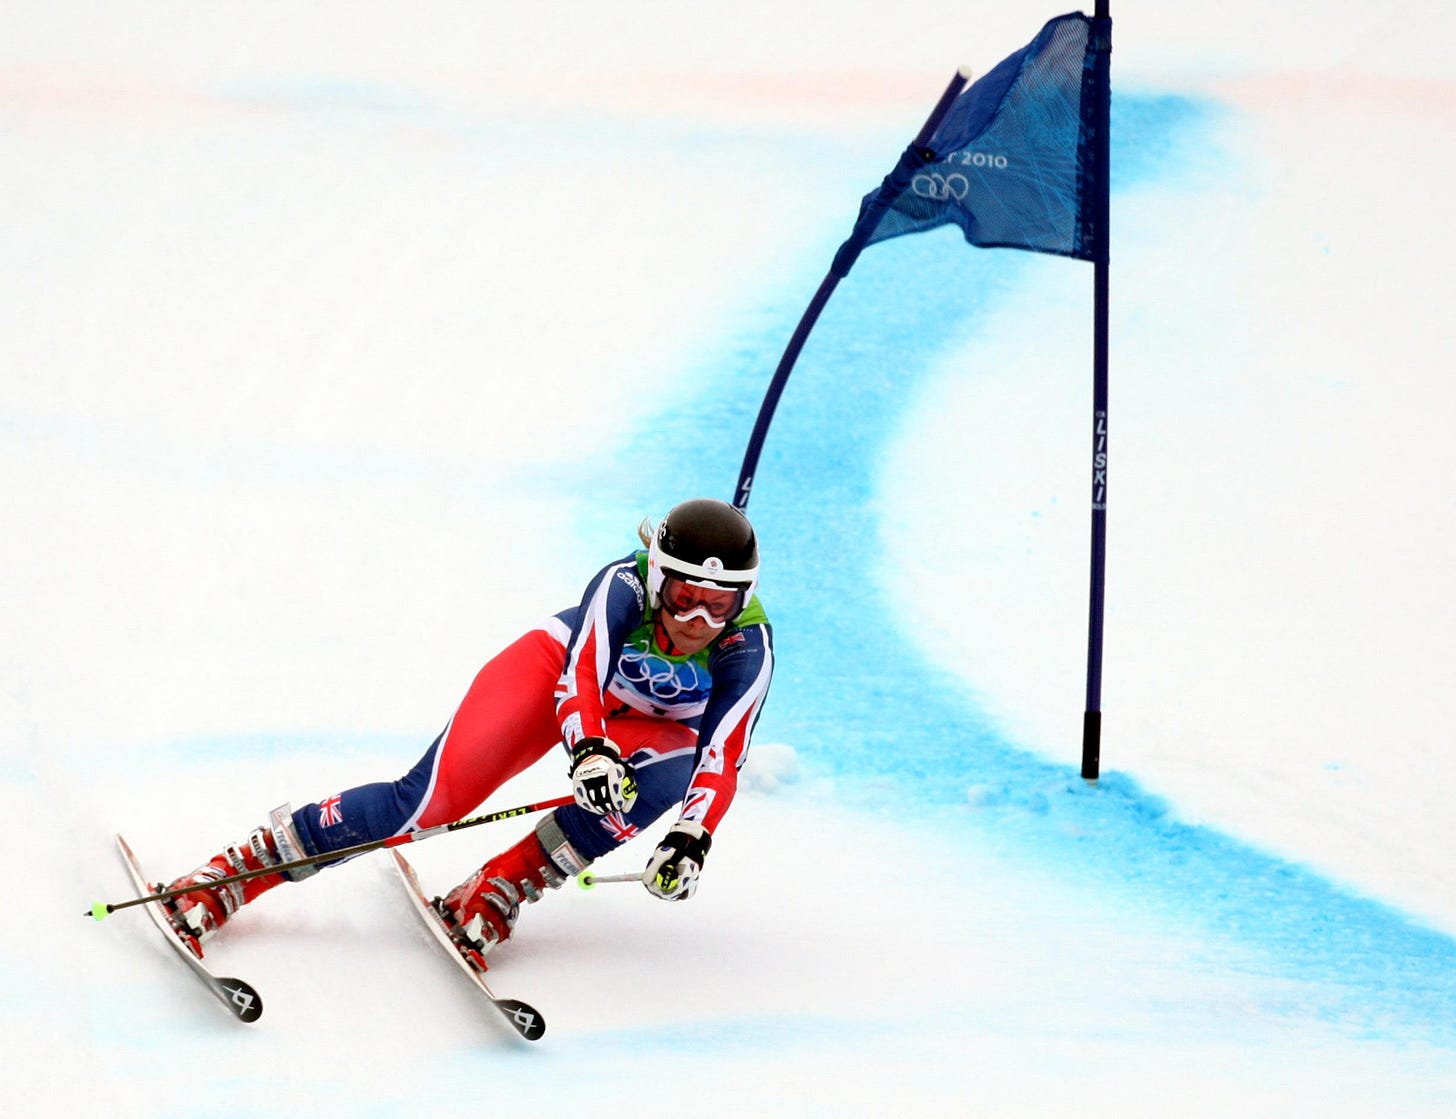 Chemmy Alcott during the Women's Giant Slalom at the 2010 Olympic Games in Canada